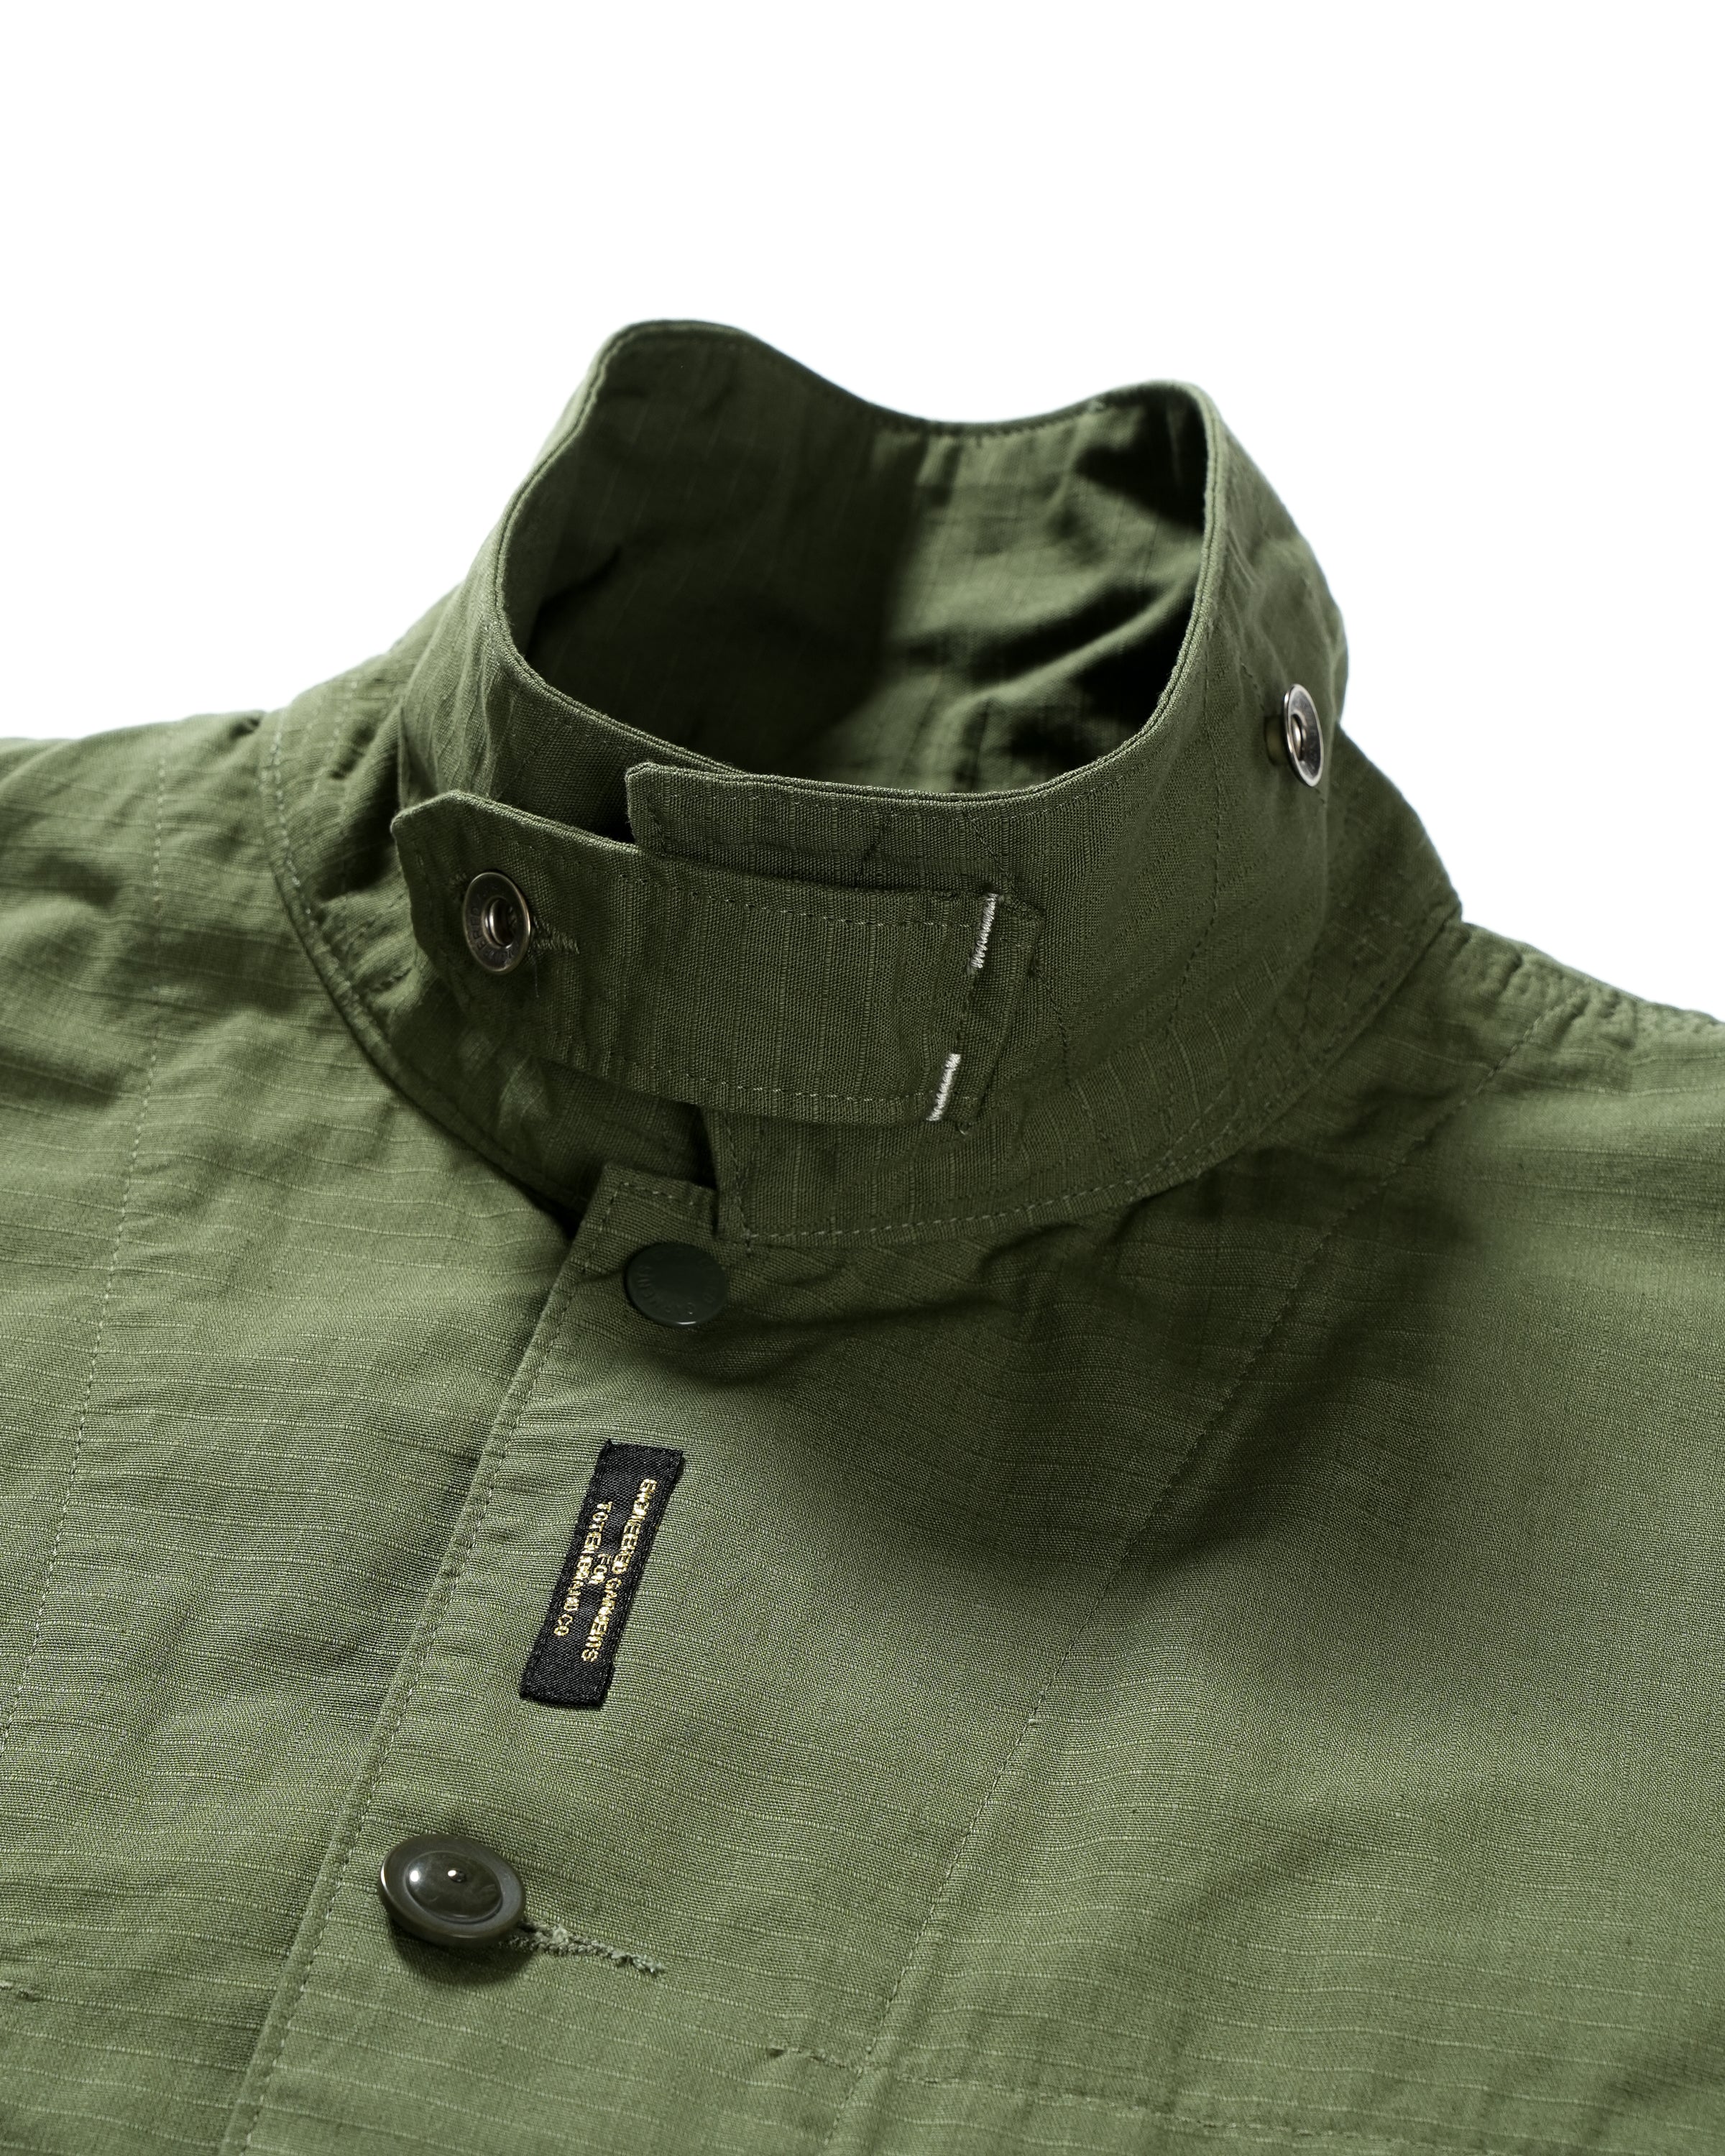 FU Coverall Jacket for Totem - Olive Cotton Ripstop